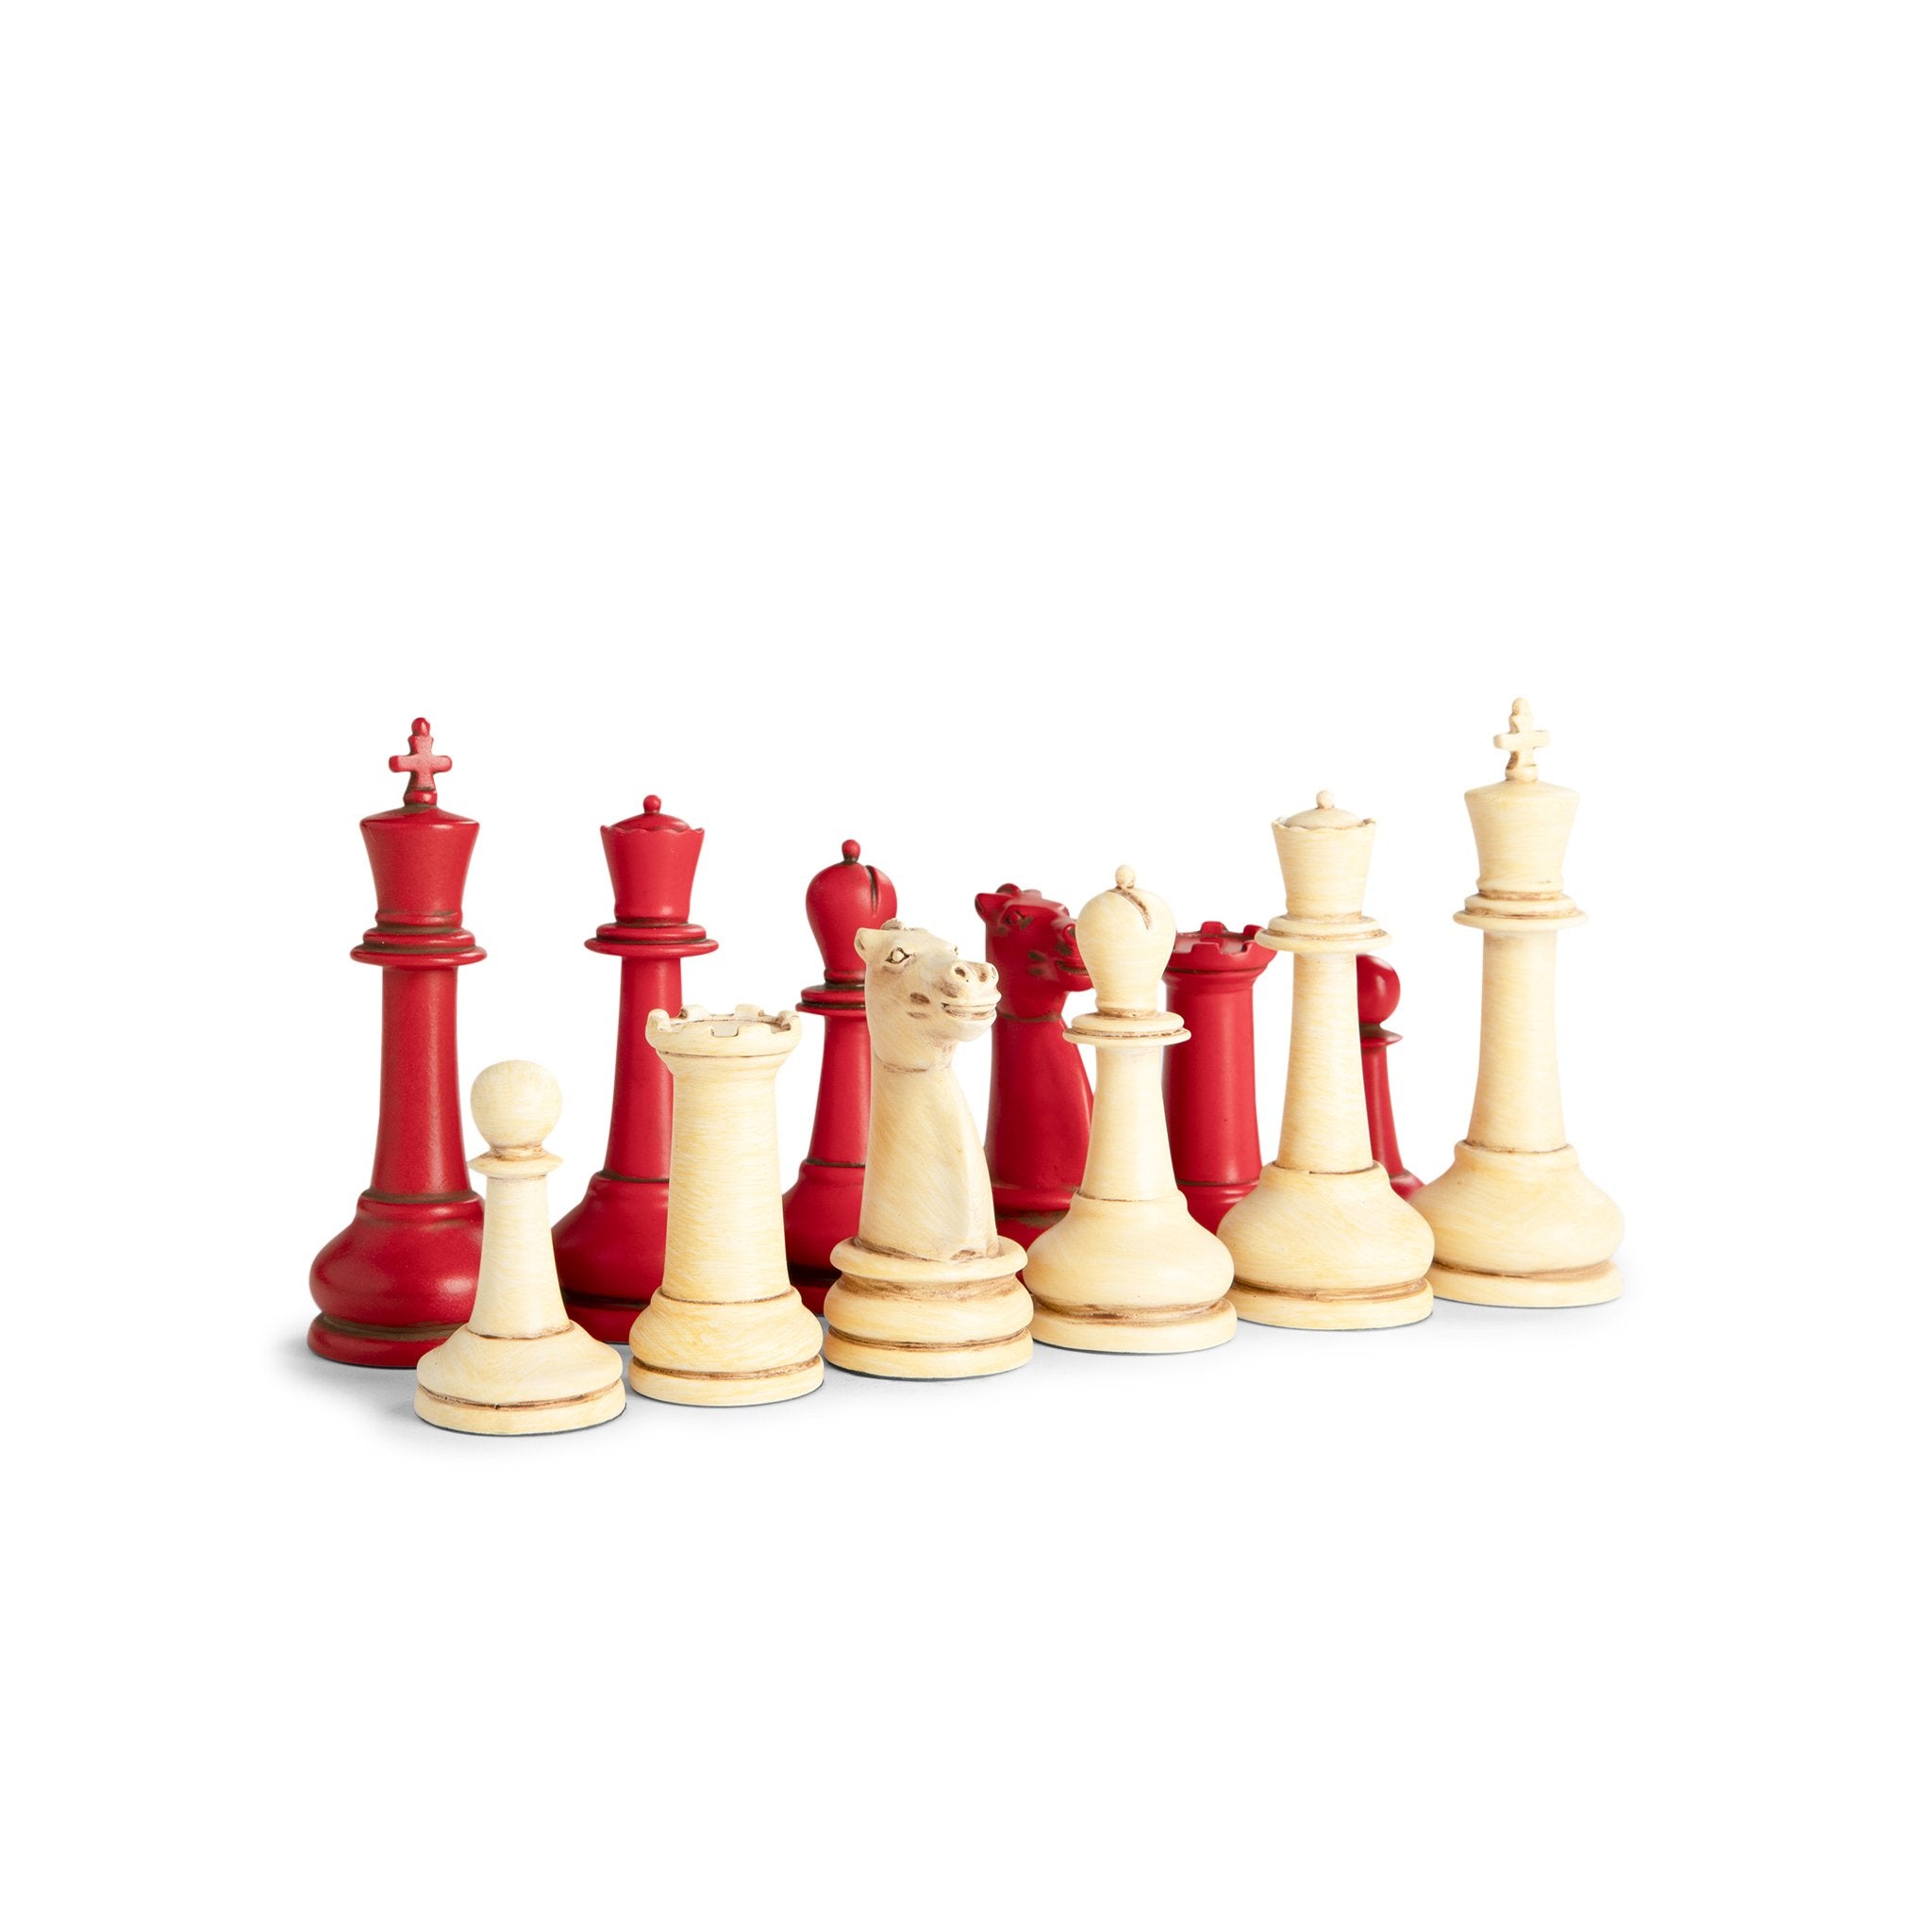 The Deluxe Classic Chess Set